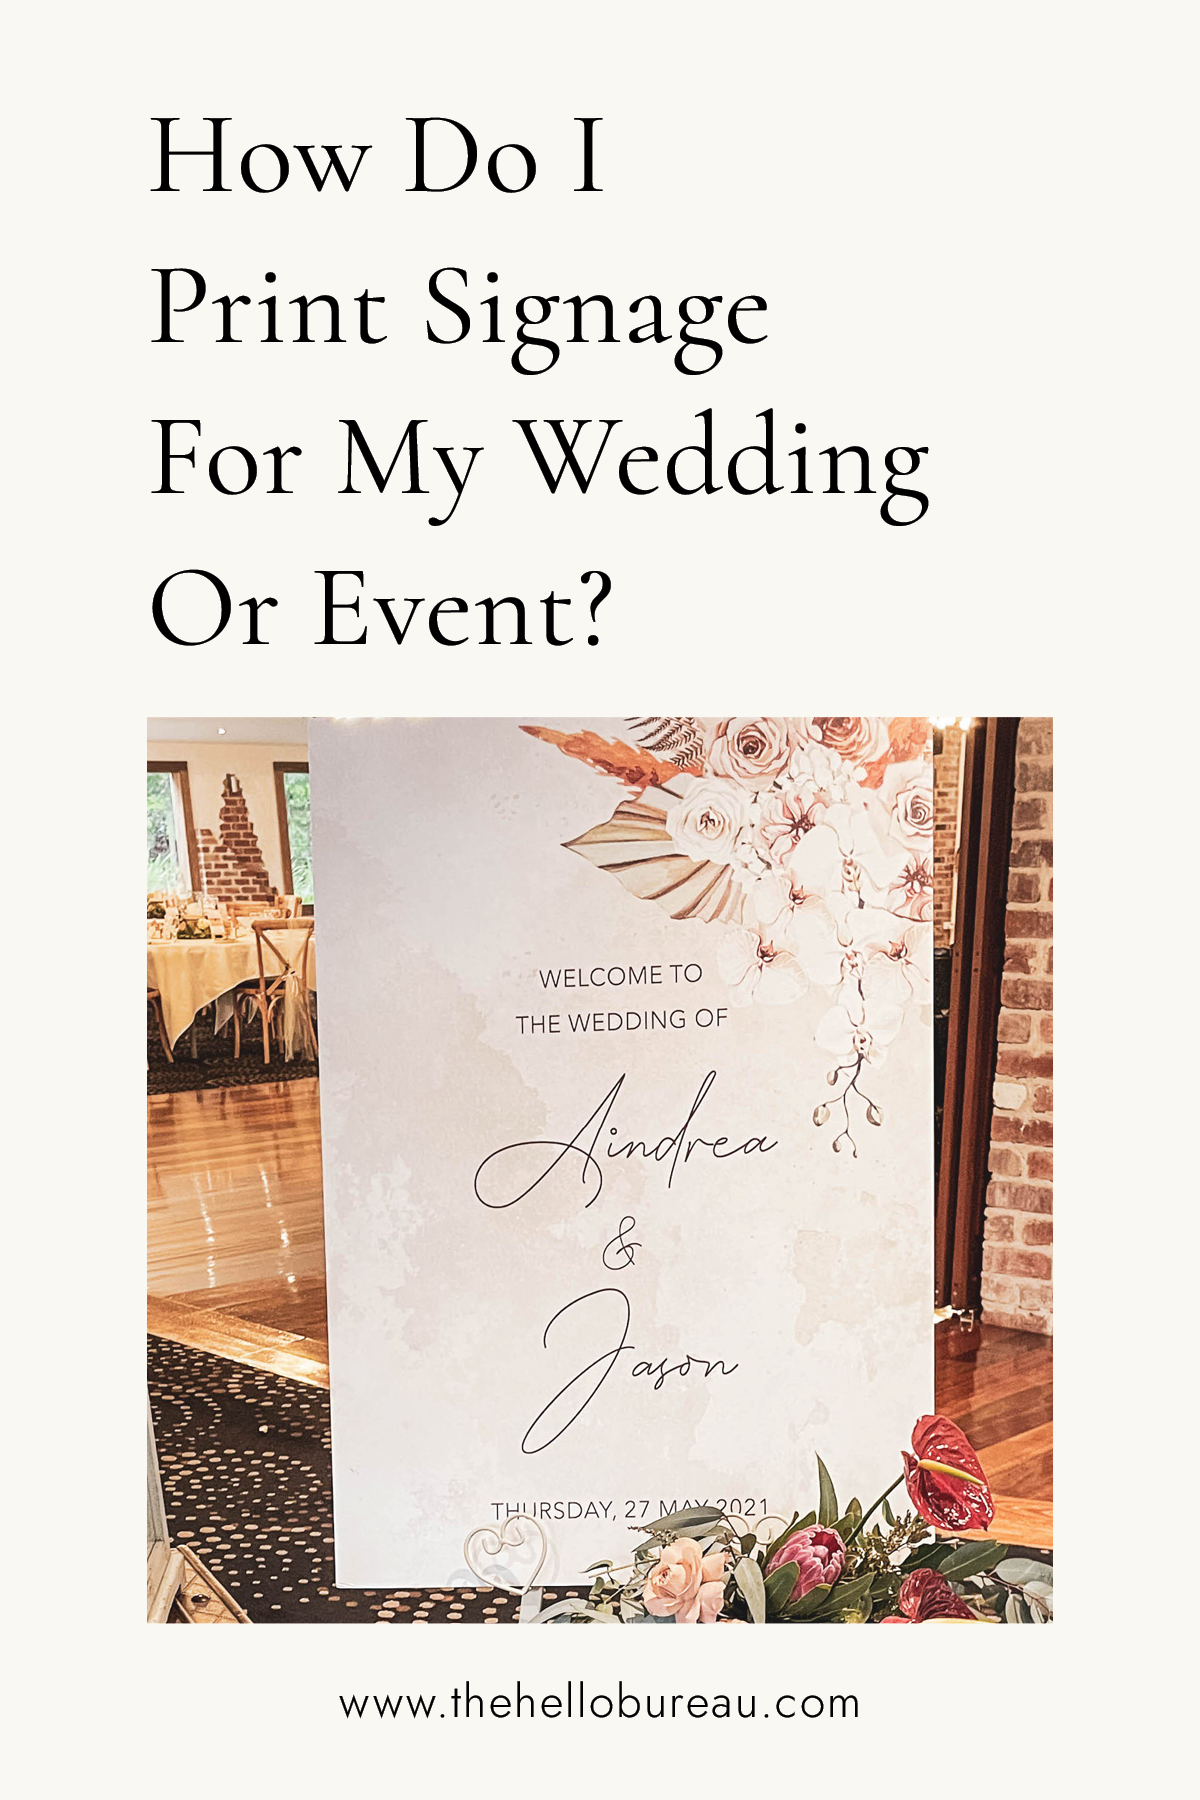 How Do I Print Signage For My Wedding Or Event?